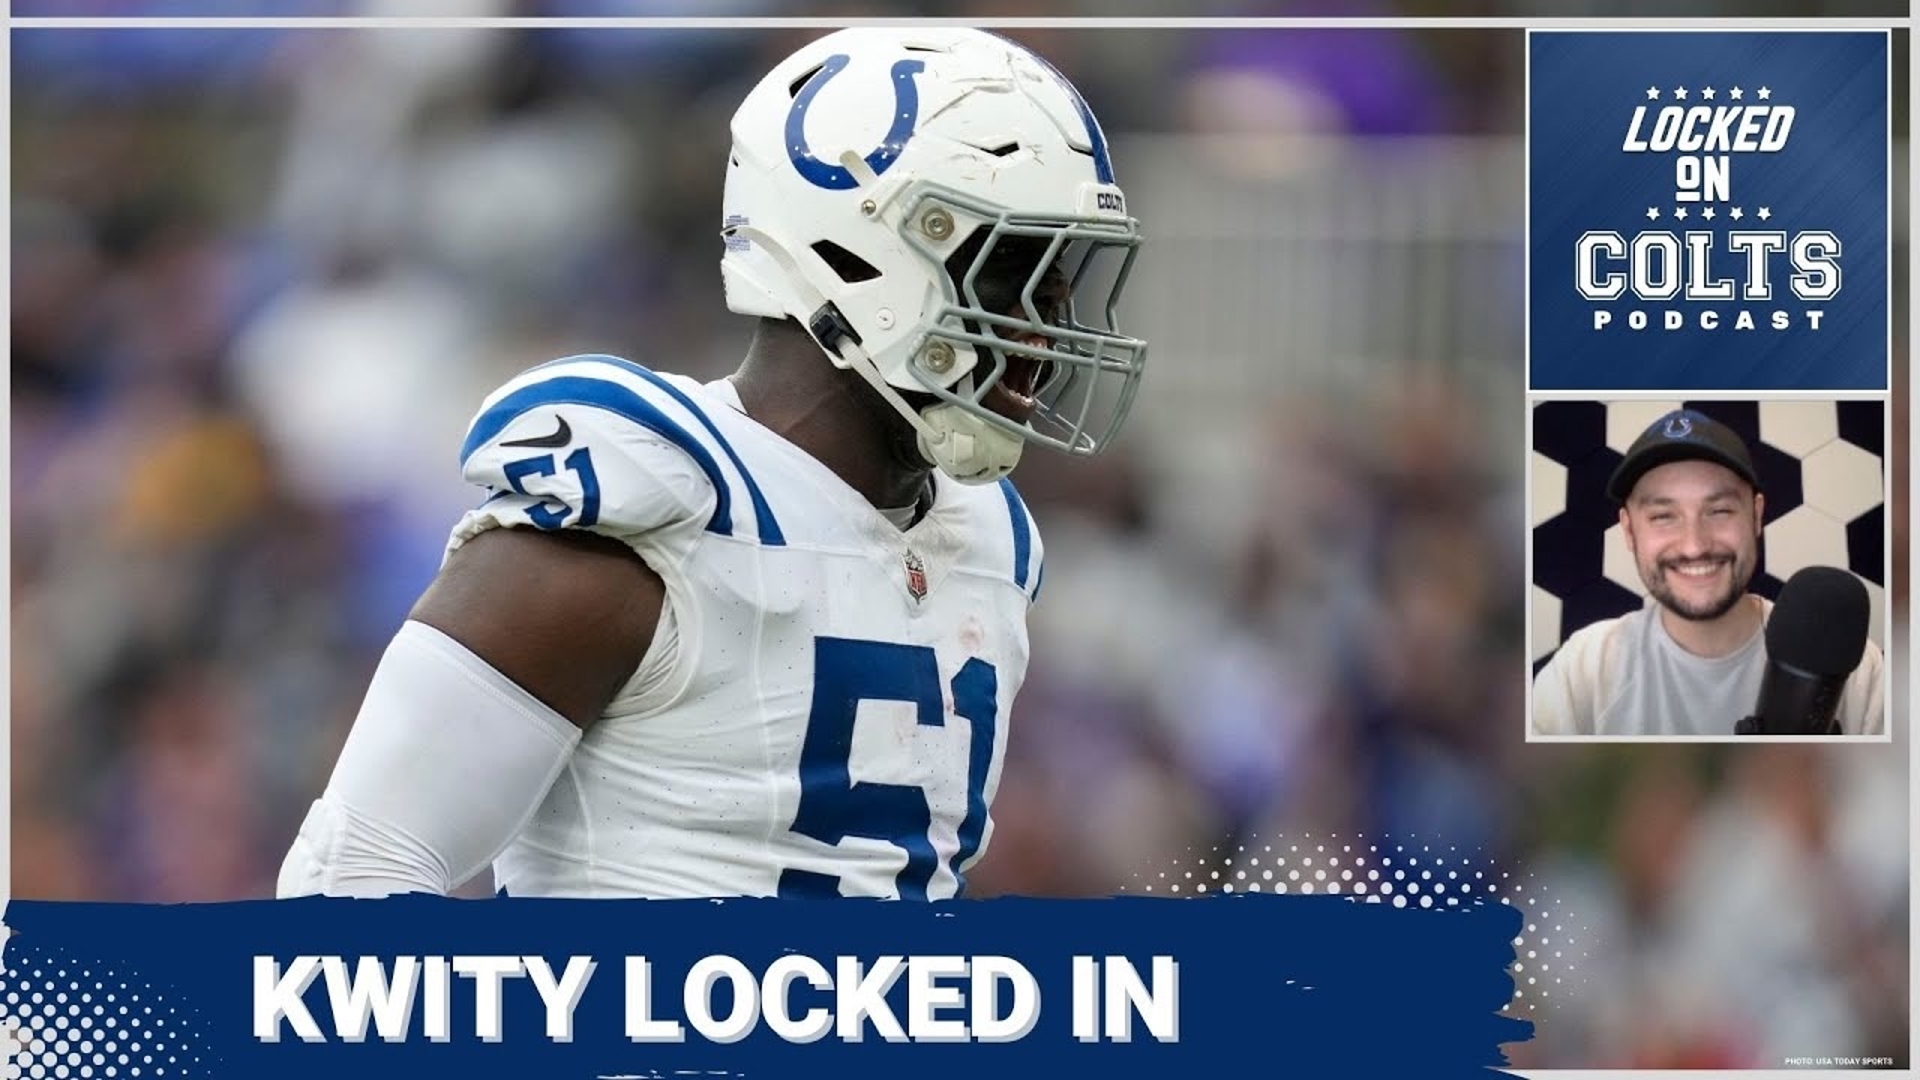 The Indianapolis Colts have exercised the fifth year option on Kwity Paye's contract, meaning he will make 13.4 million dollars in 2025.